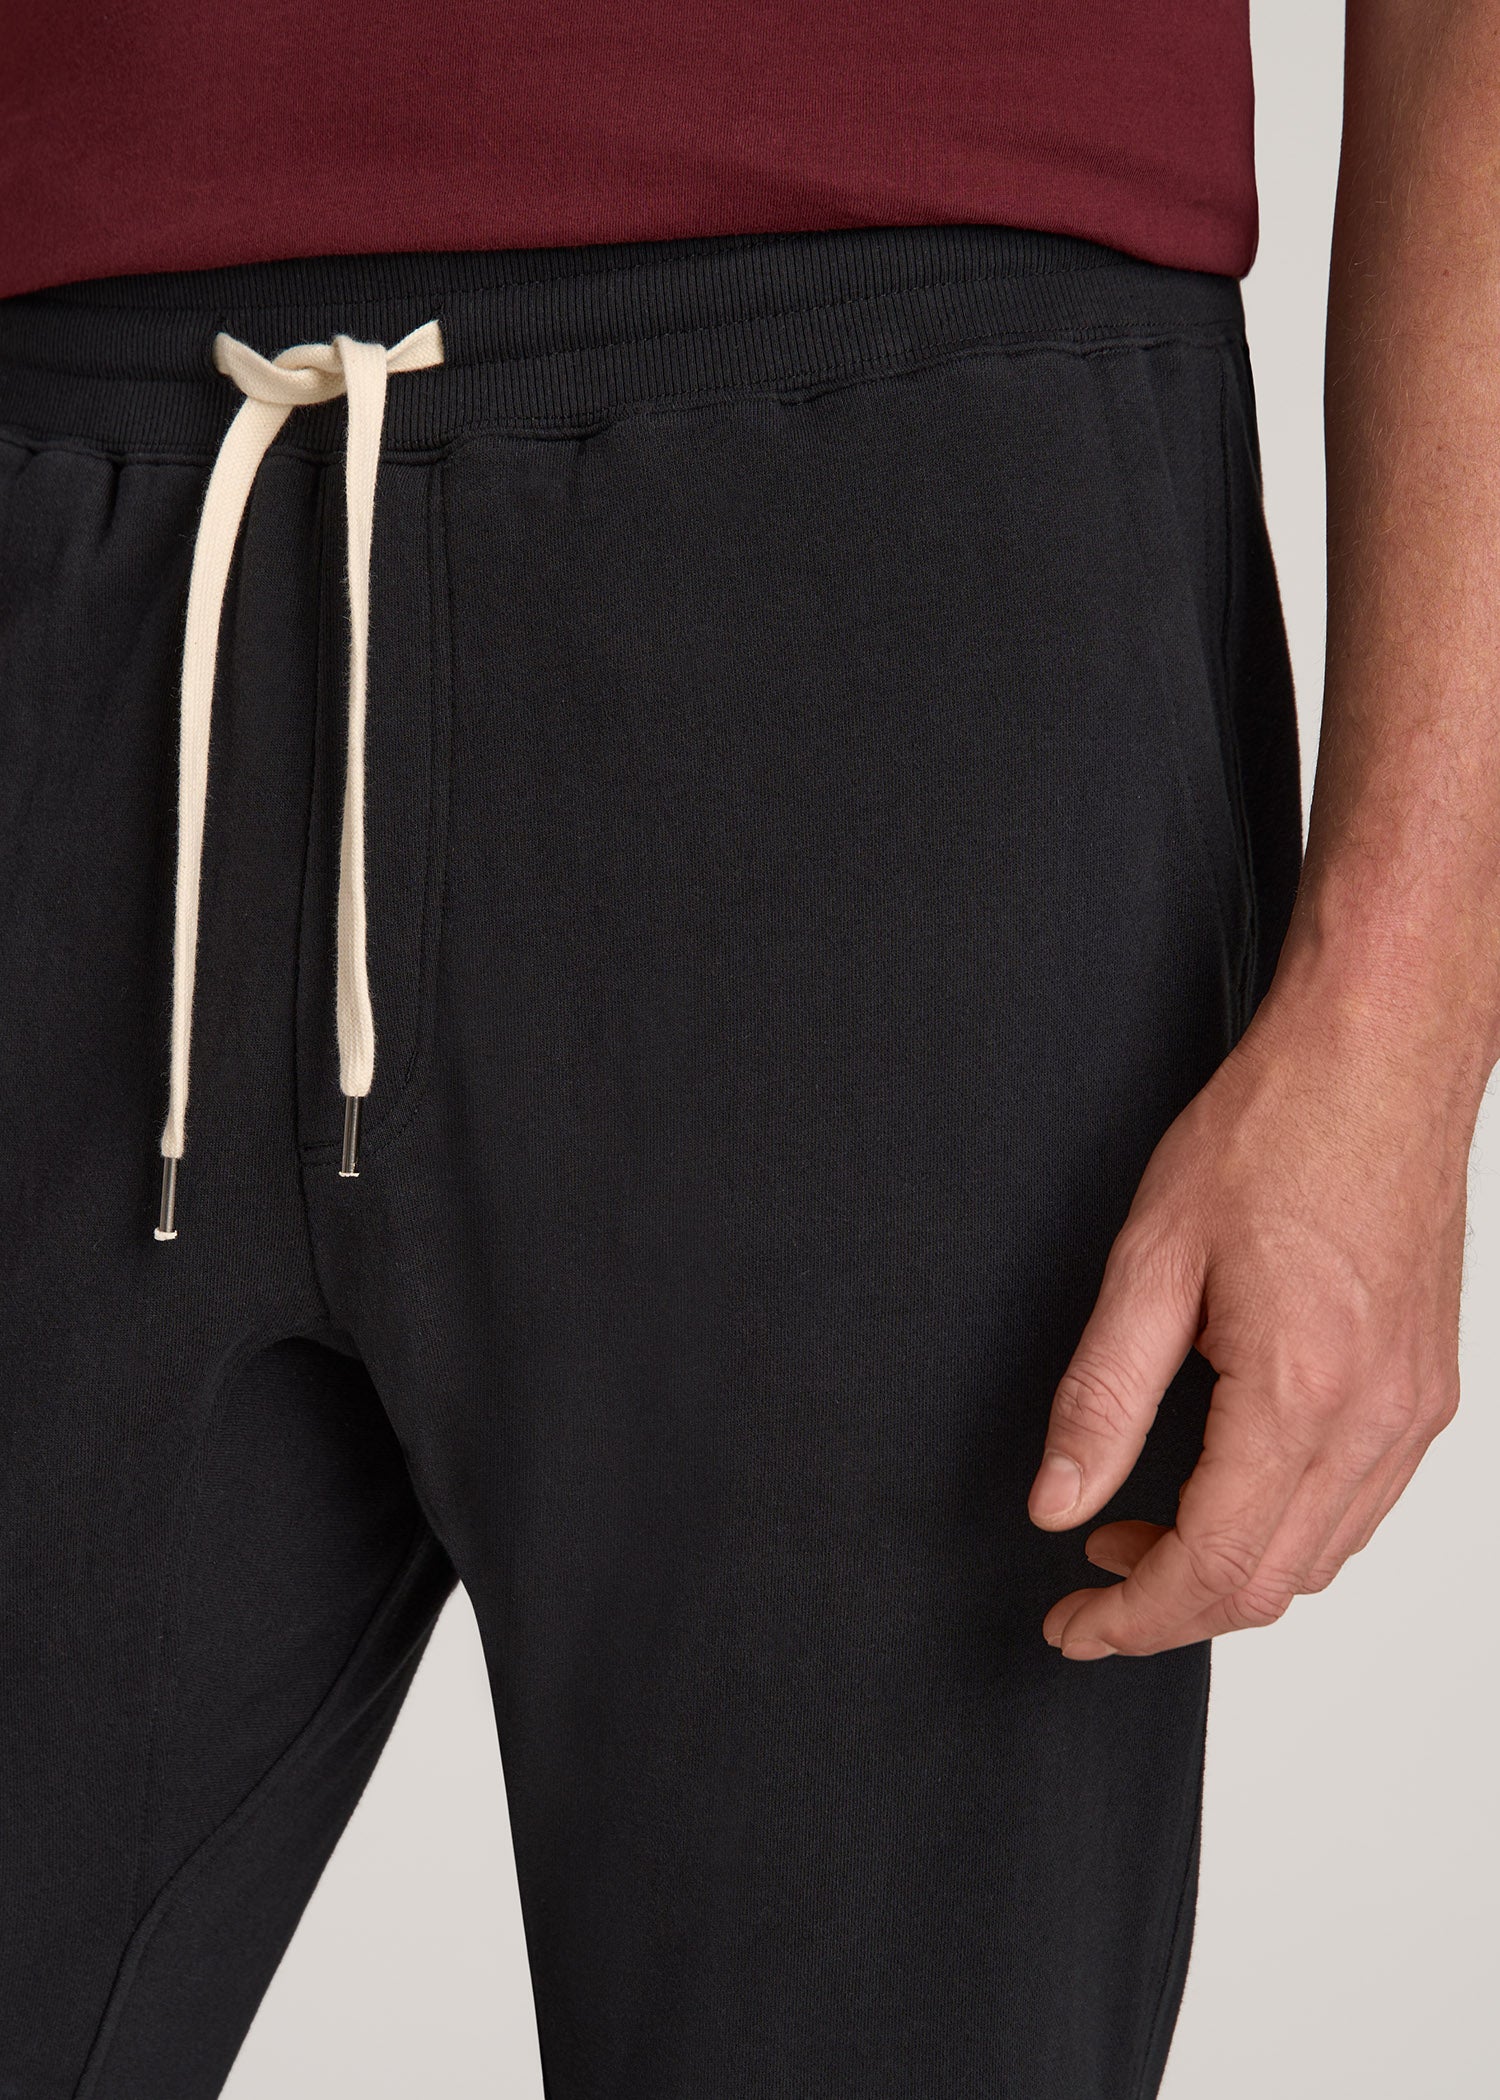 LJ Brushed Terrycloth Pants for Tall Men